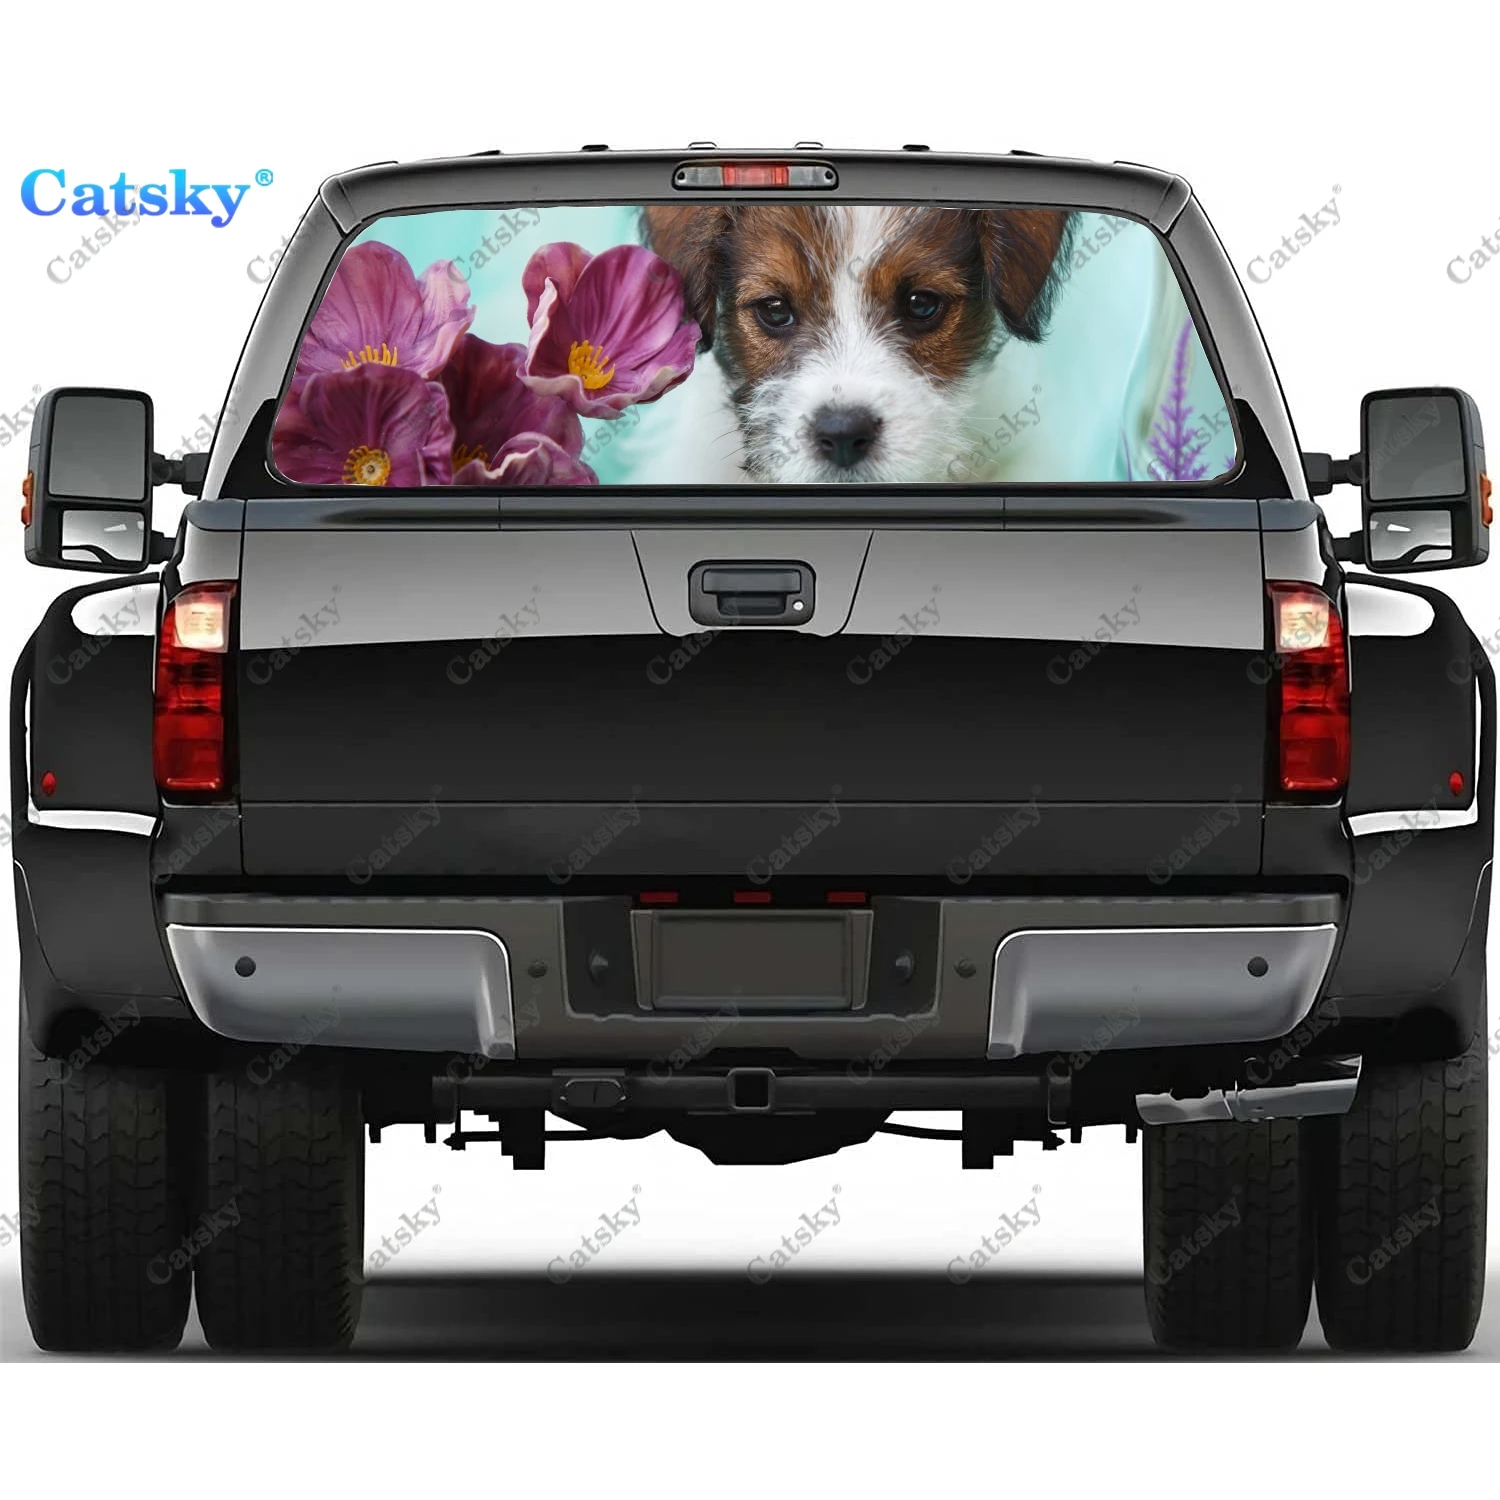 

Animal Jack Russell Terrier Rear Window Sticker Windshield Decal Truck Rear Window Decal Universal Tint Perforated Vinyl Graphic